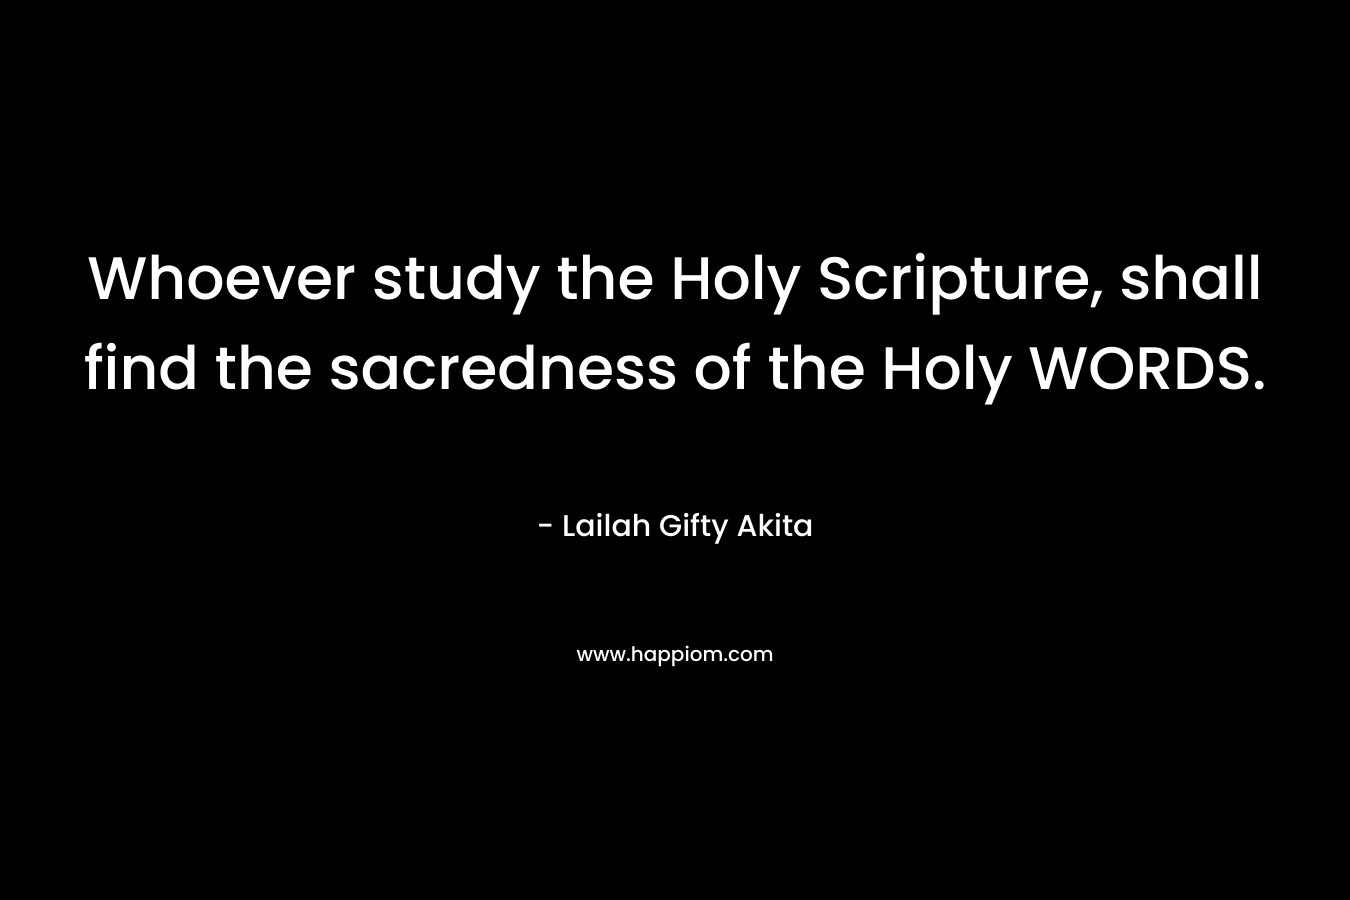 Whoever study the Holy Scripture, shall find the sacredness of the Holy WORDS.